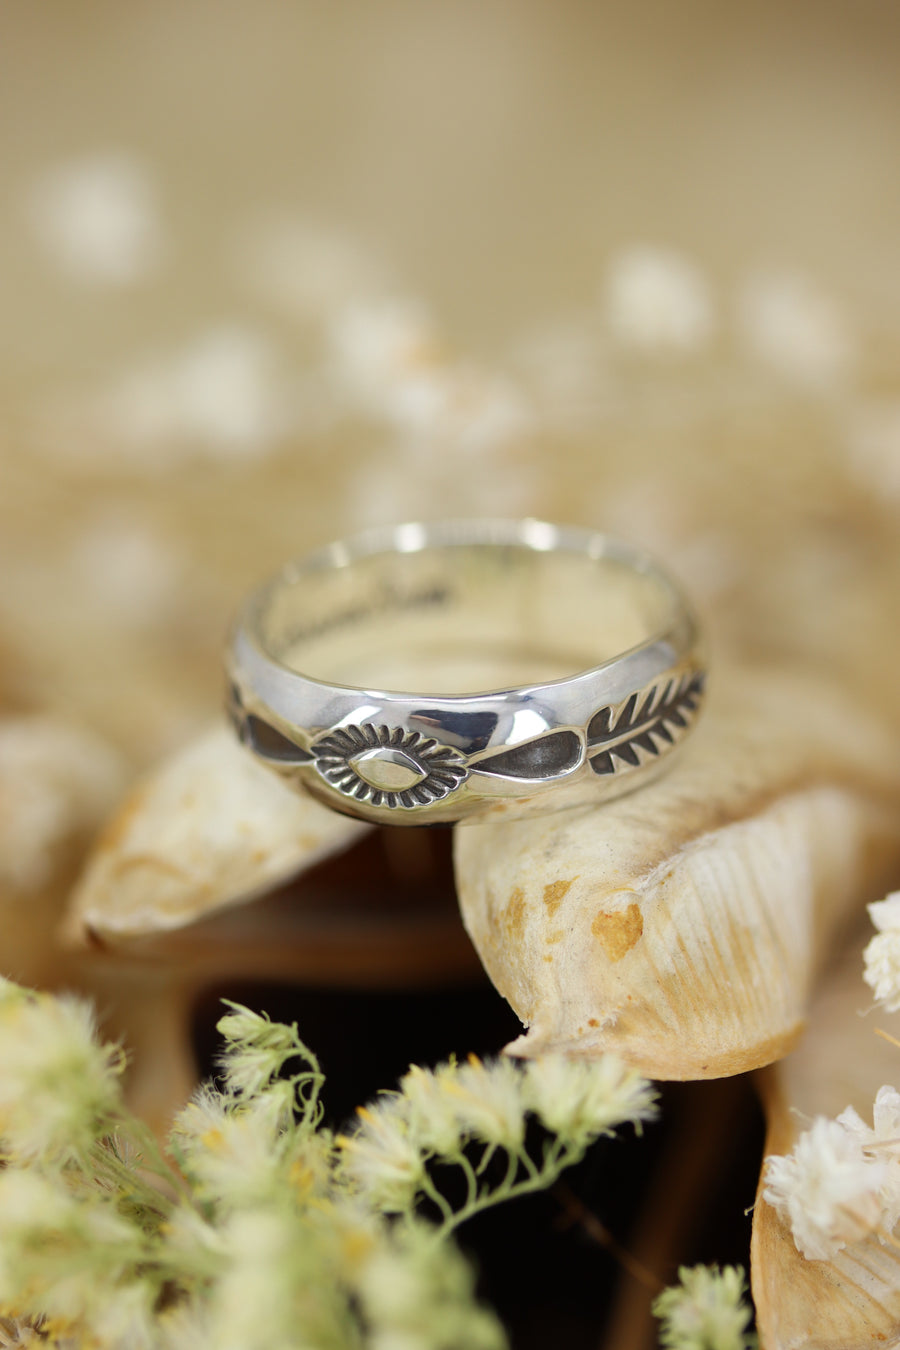 Stamped Stacker Ring (size 7.75)